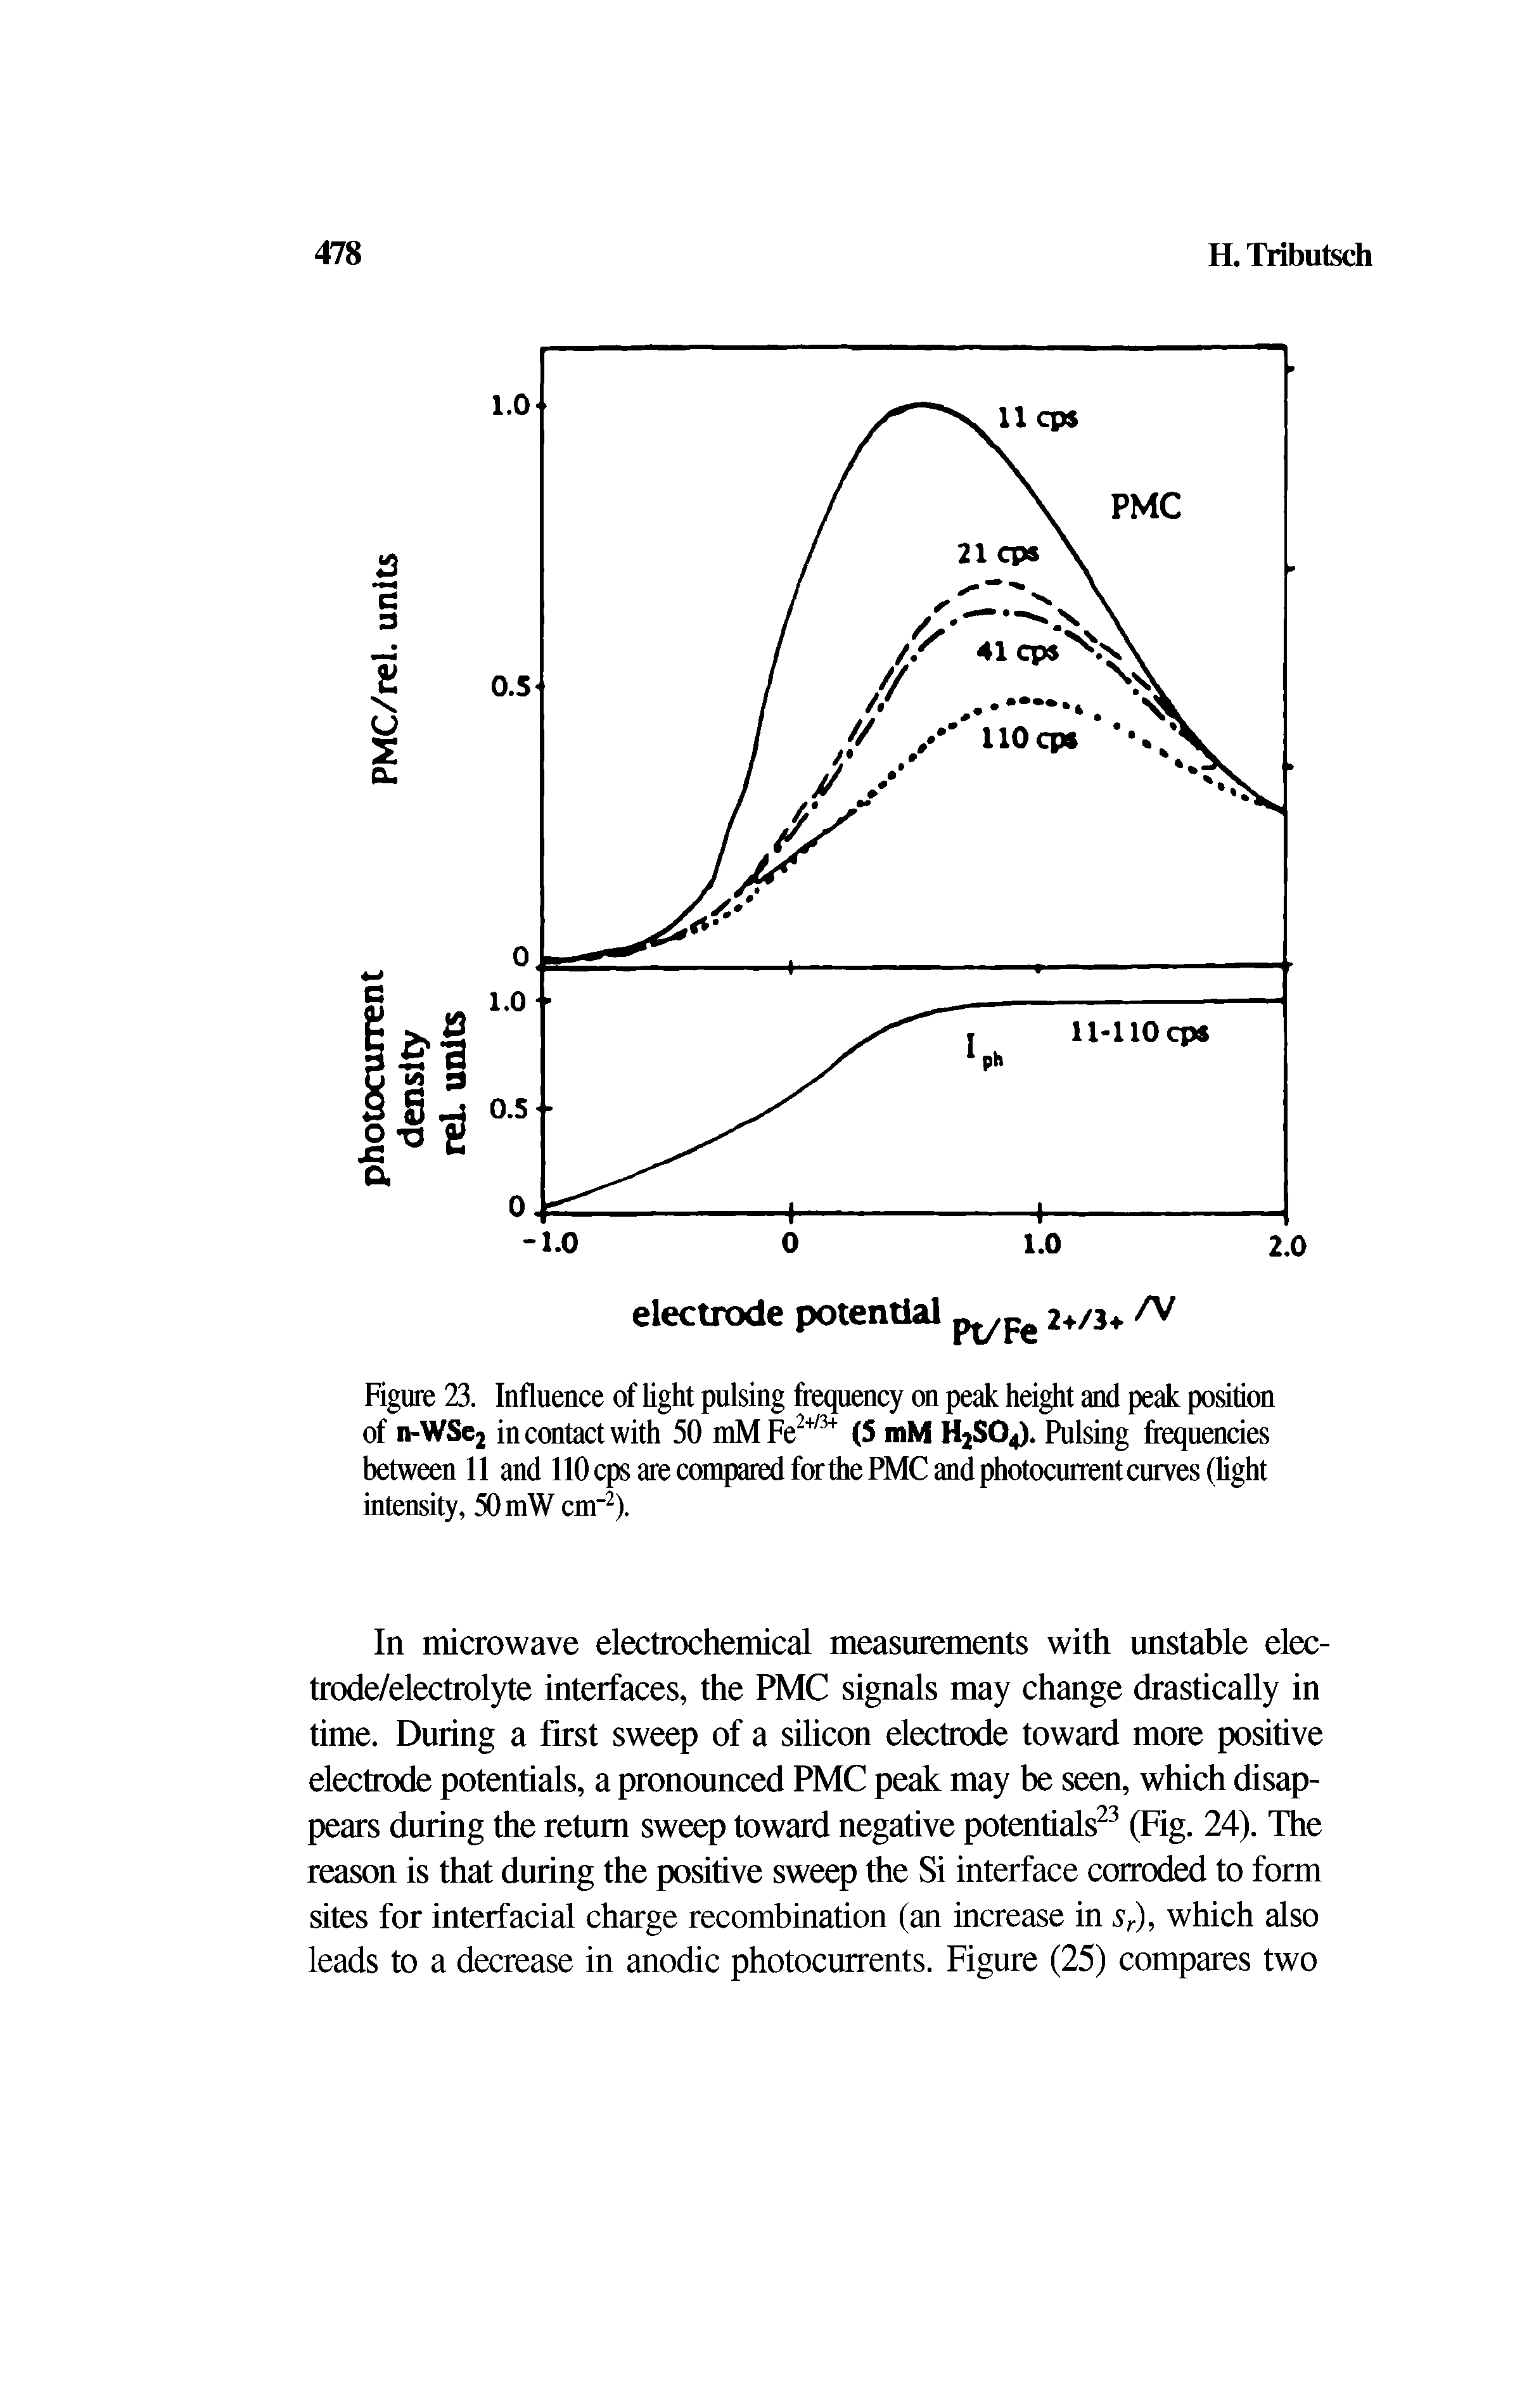 Figure 23. Influence of light pulsing frequency on peak height and peak position of n-WSe2 in contact with 50 mMFe2+/3+ (5 mM H2SO4). Pulsing frequencies between 11 and 110 cps are compared forthe PMC and photocurrent curves (hght intensity, 50 mW cm-2).